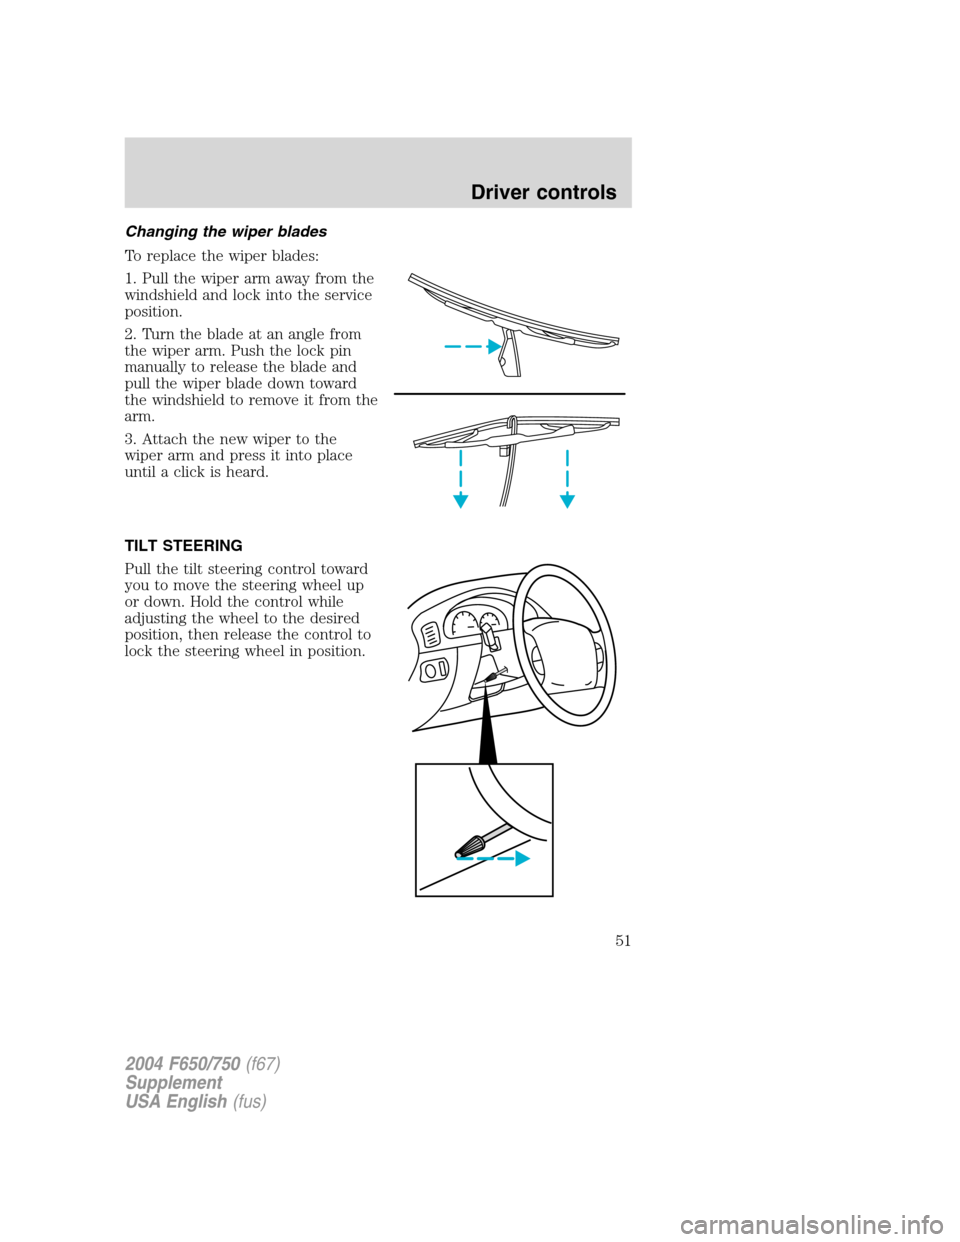 FORD F650 2004 11.G Owners Manual Changing the wiper blades
To replace the wiper blades:
1. Pull the wiper arm away from the
windshield and lock into the service
position.
2. Turn the blade at an angle from
the wiper arm. Push the loc